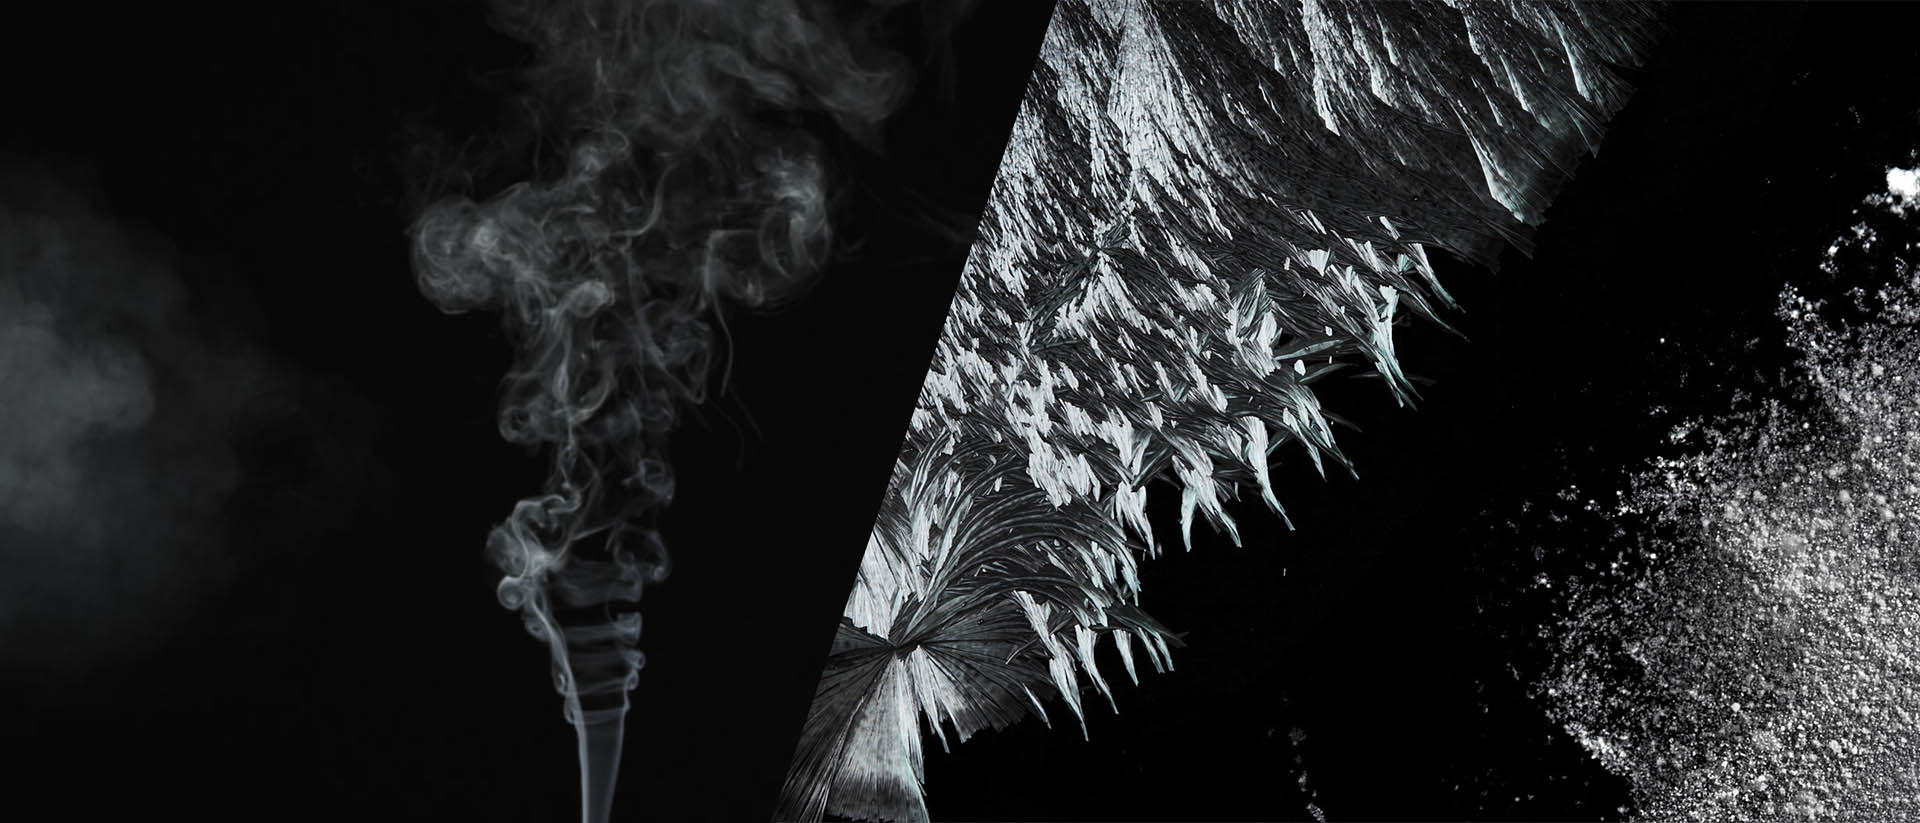 2 New VFX Collections Now Available: Cigarette Smoke & Ice & Frost